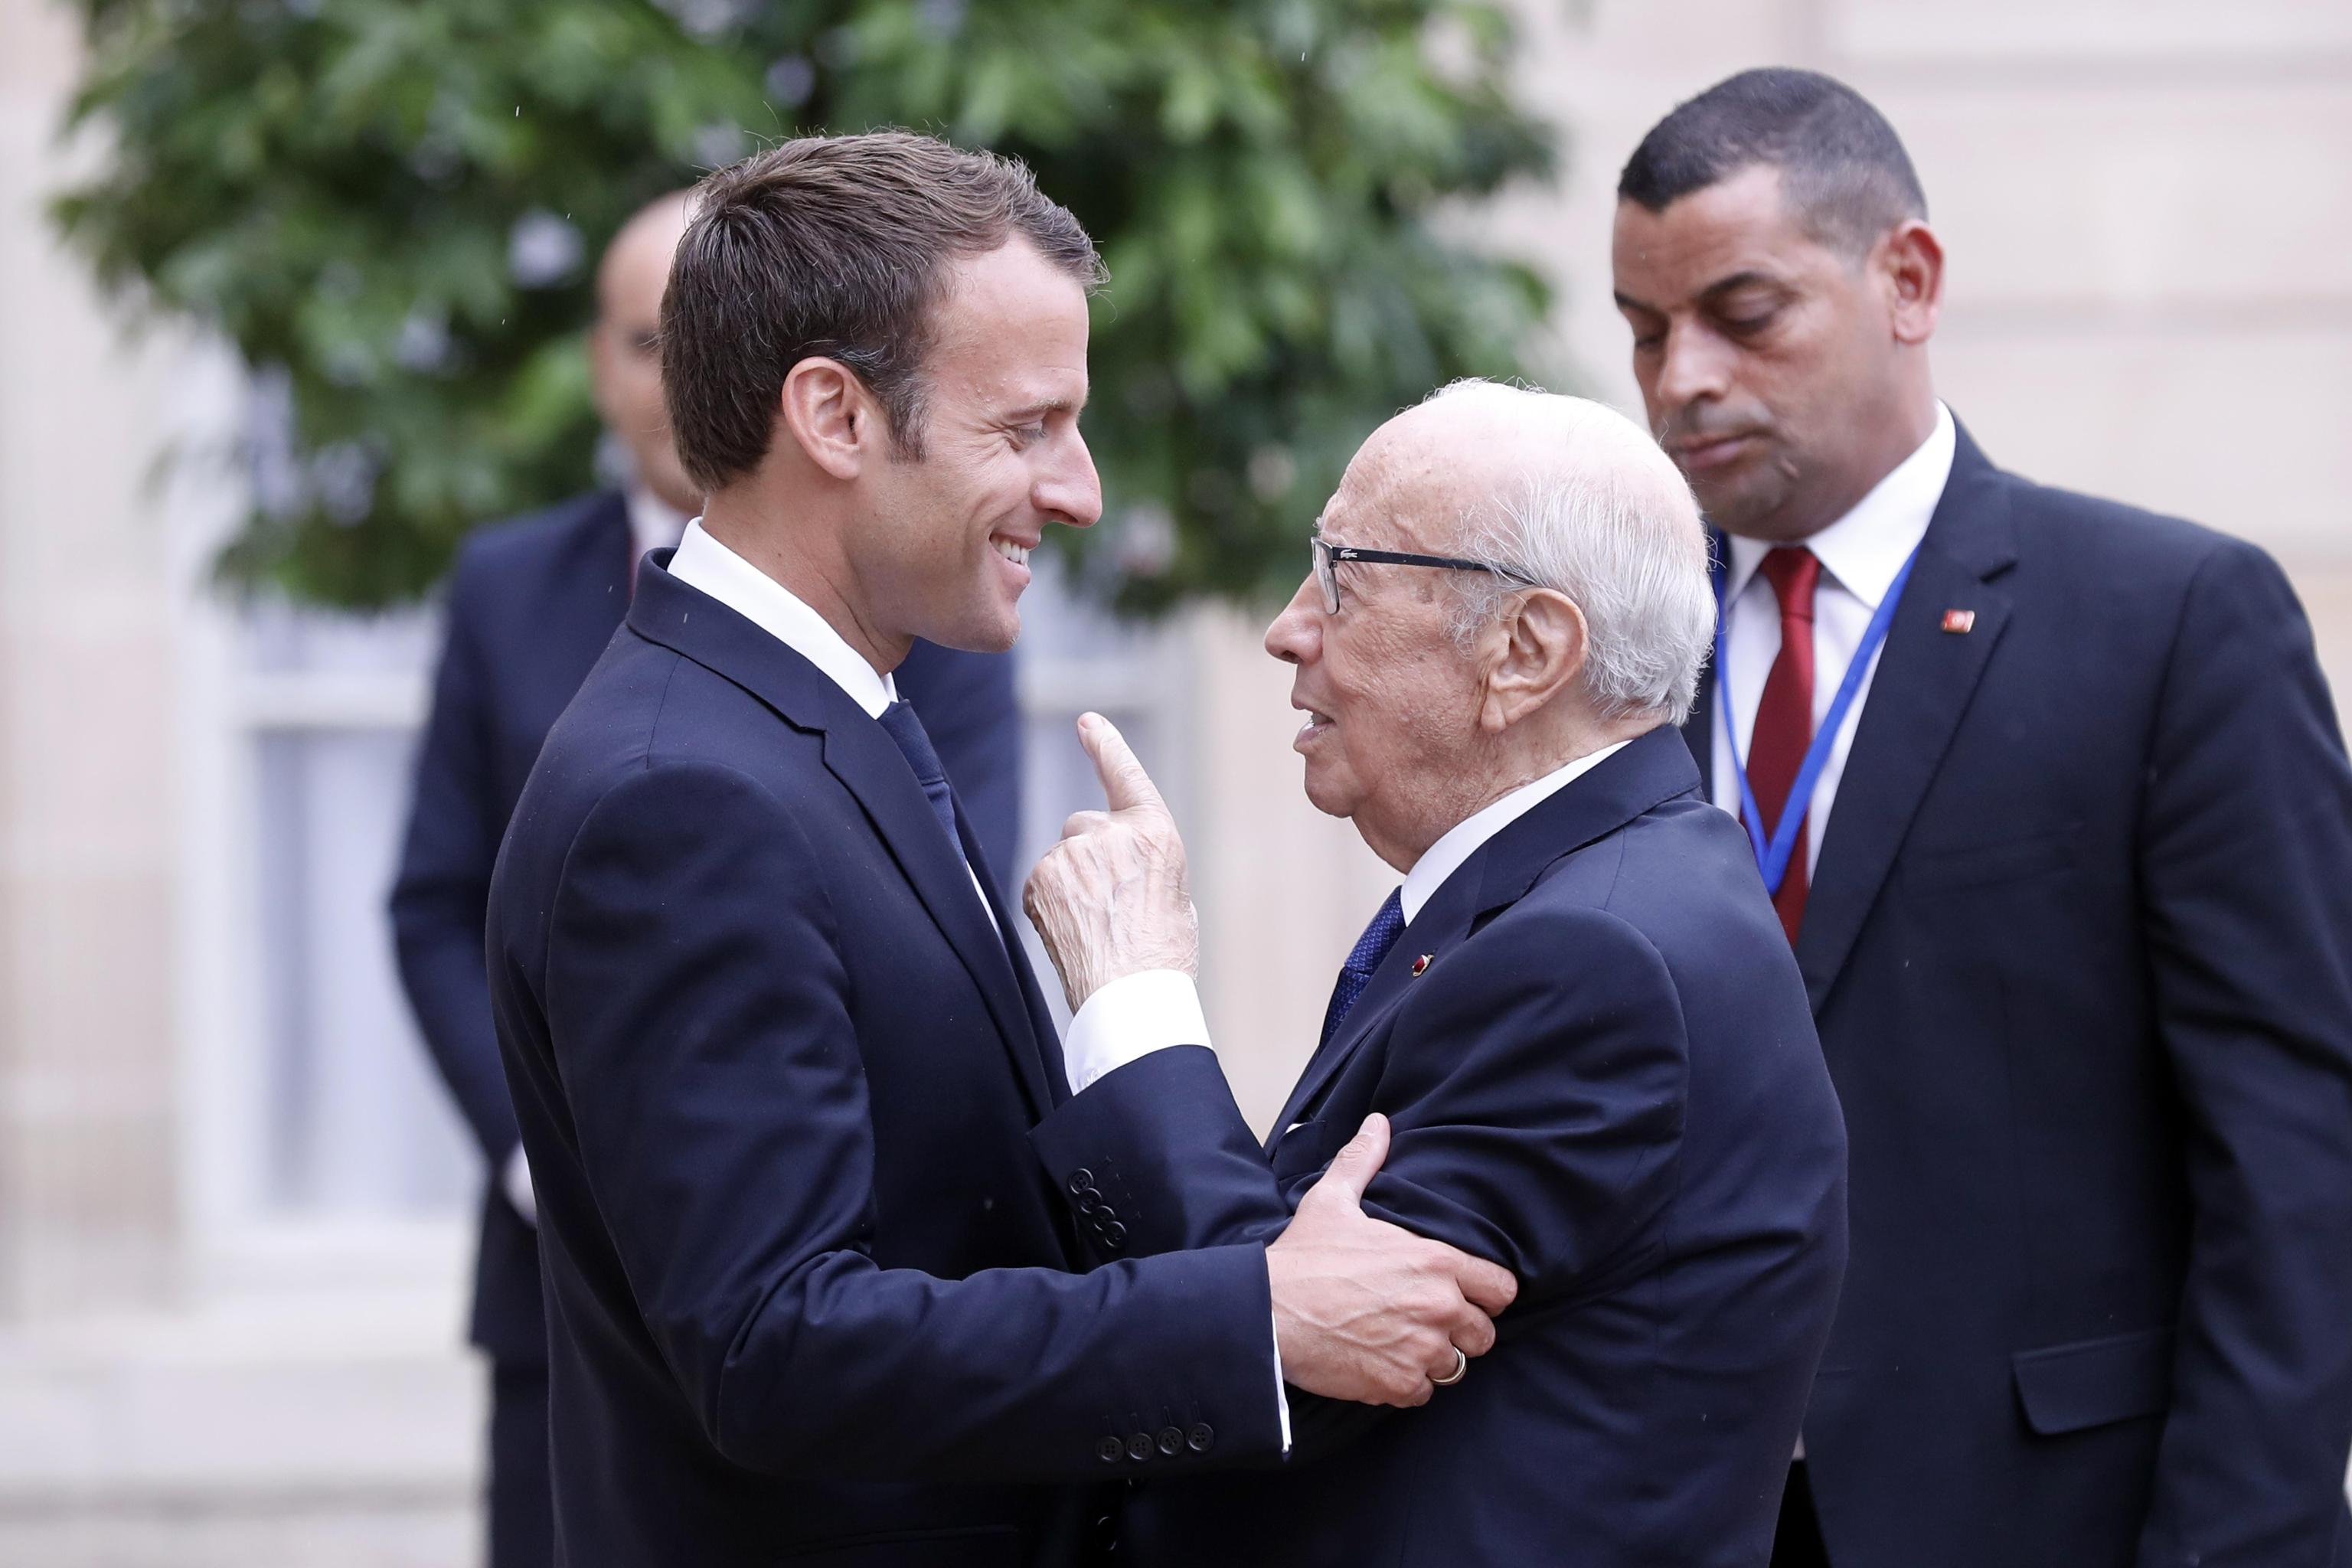 epa06770230 French President Emmanuel Macron (L) welcomes Tunisian President Beji Caid Eessebsi (C), upon his arrival for the international congress on Libya, at the Elysee Palace in Paris, France, 29 May 2018.  EPA/ETIENNE LAURENT